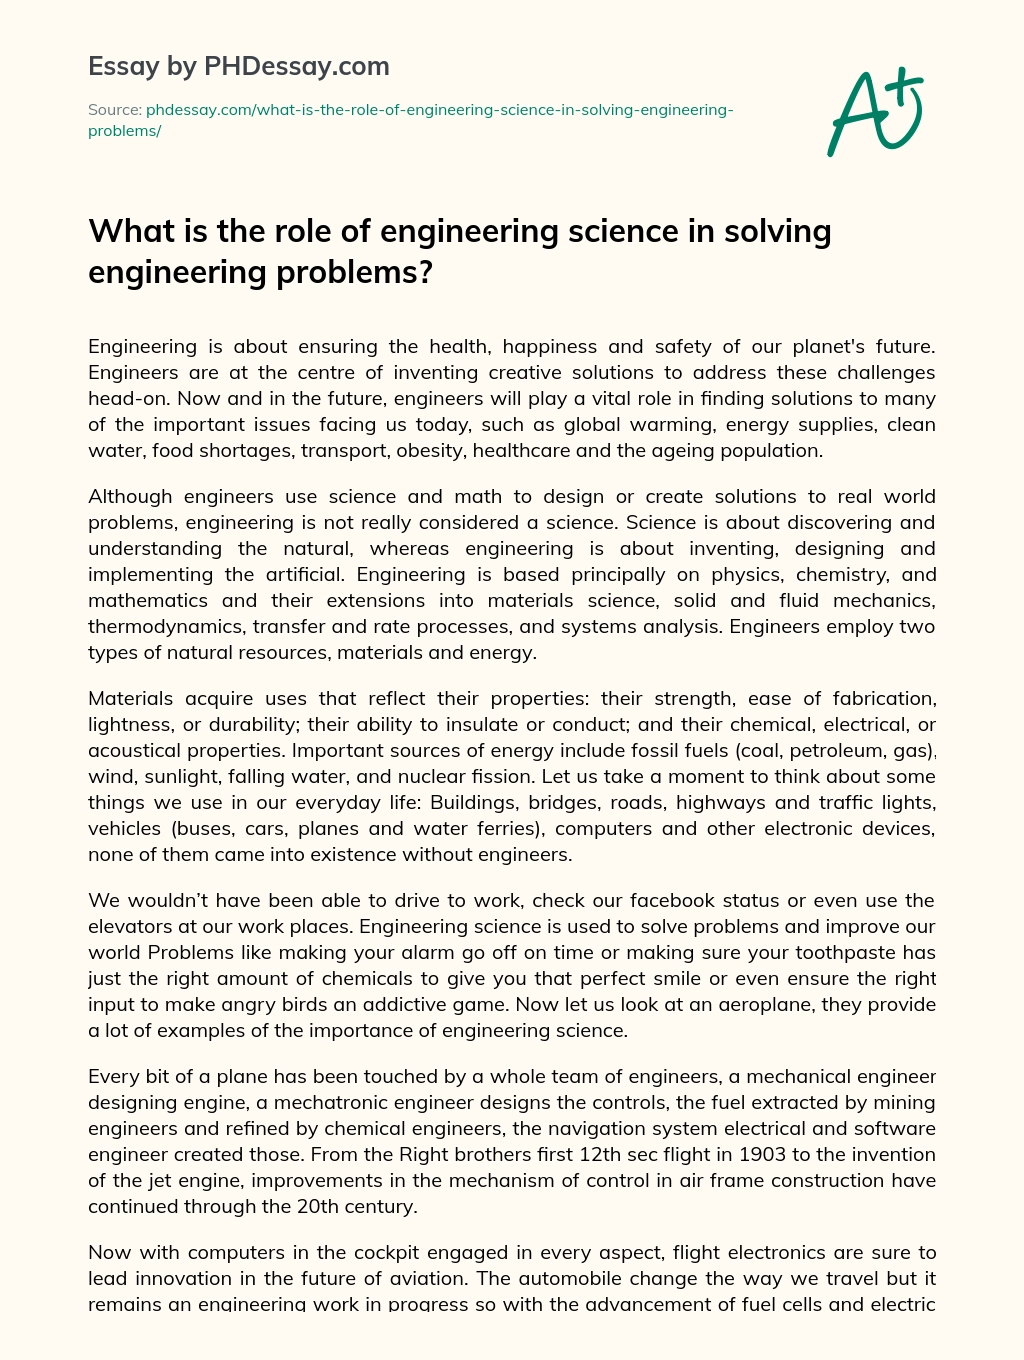 What is the role of engineering science in solving engineering problems? essay